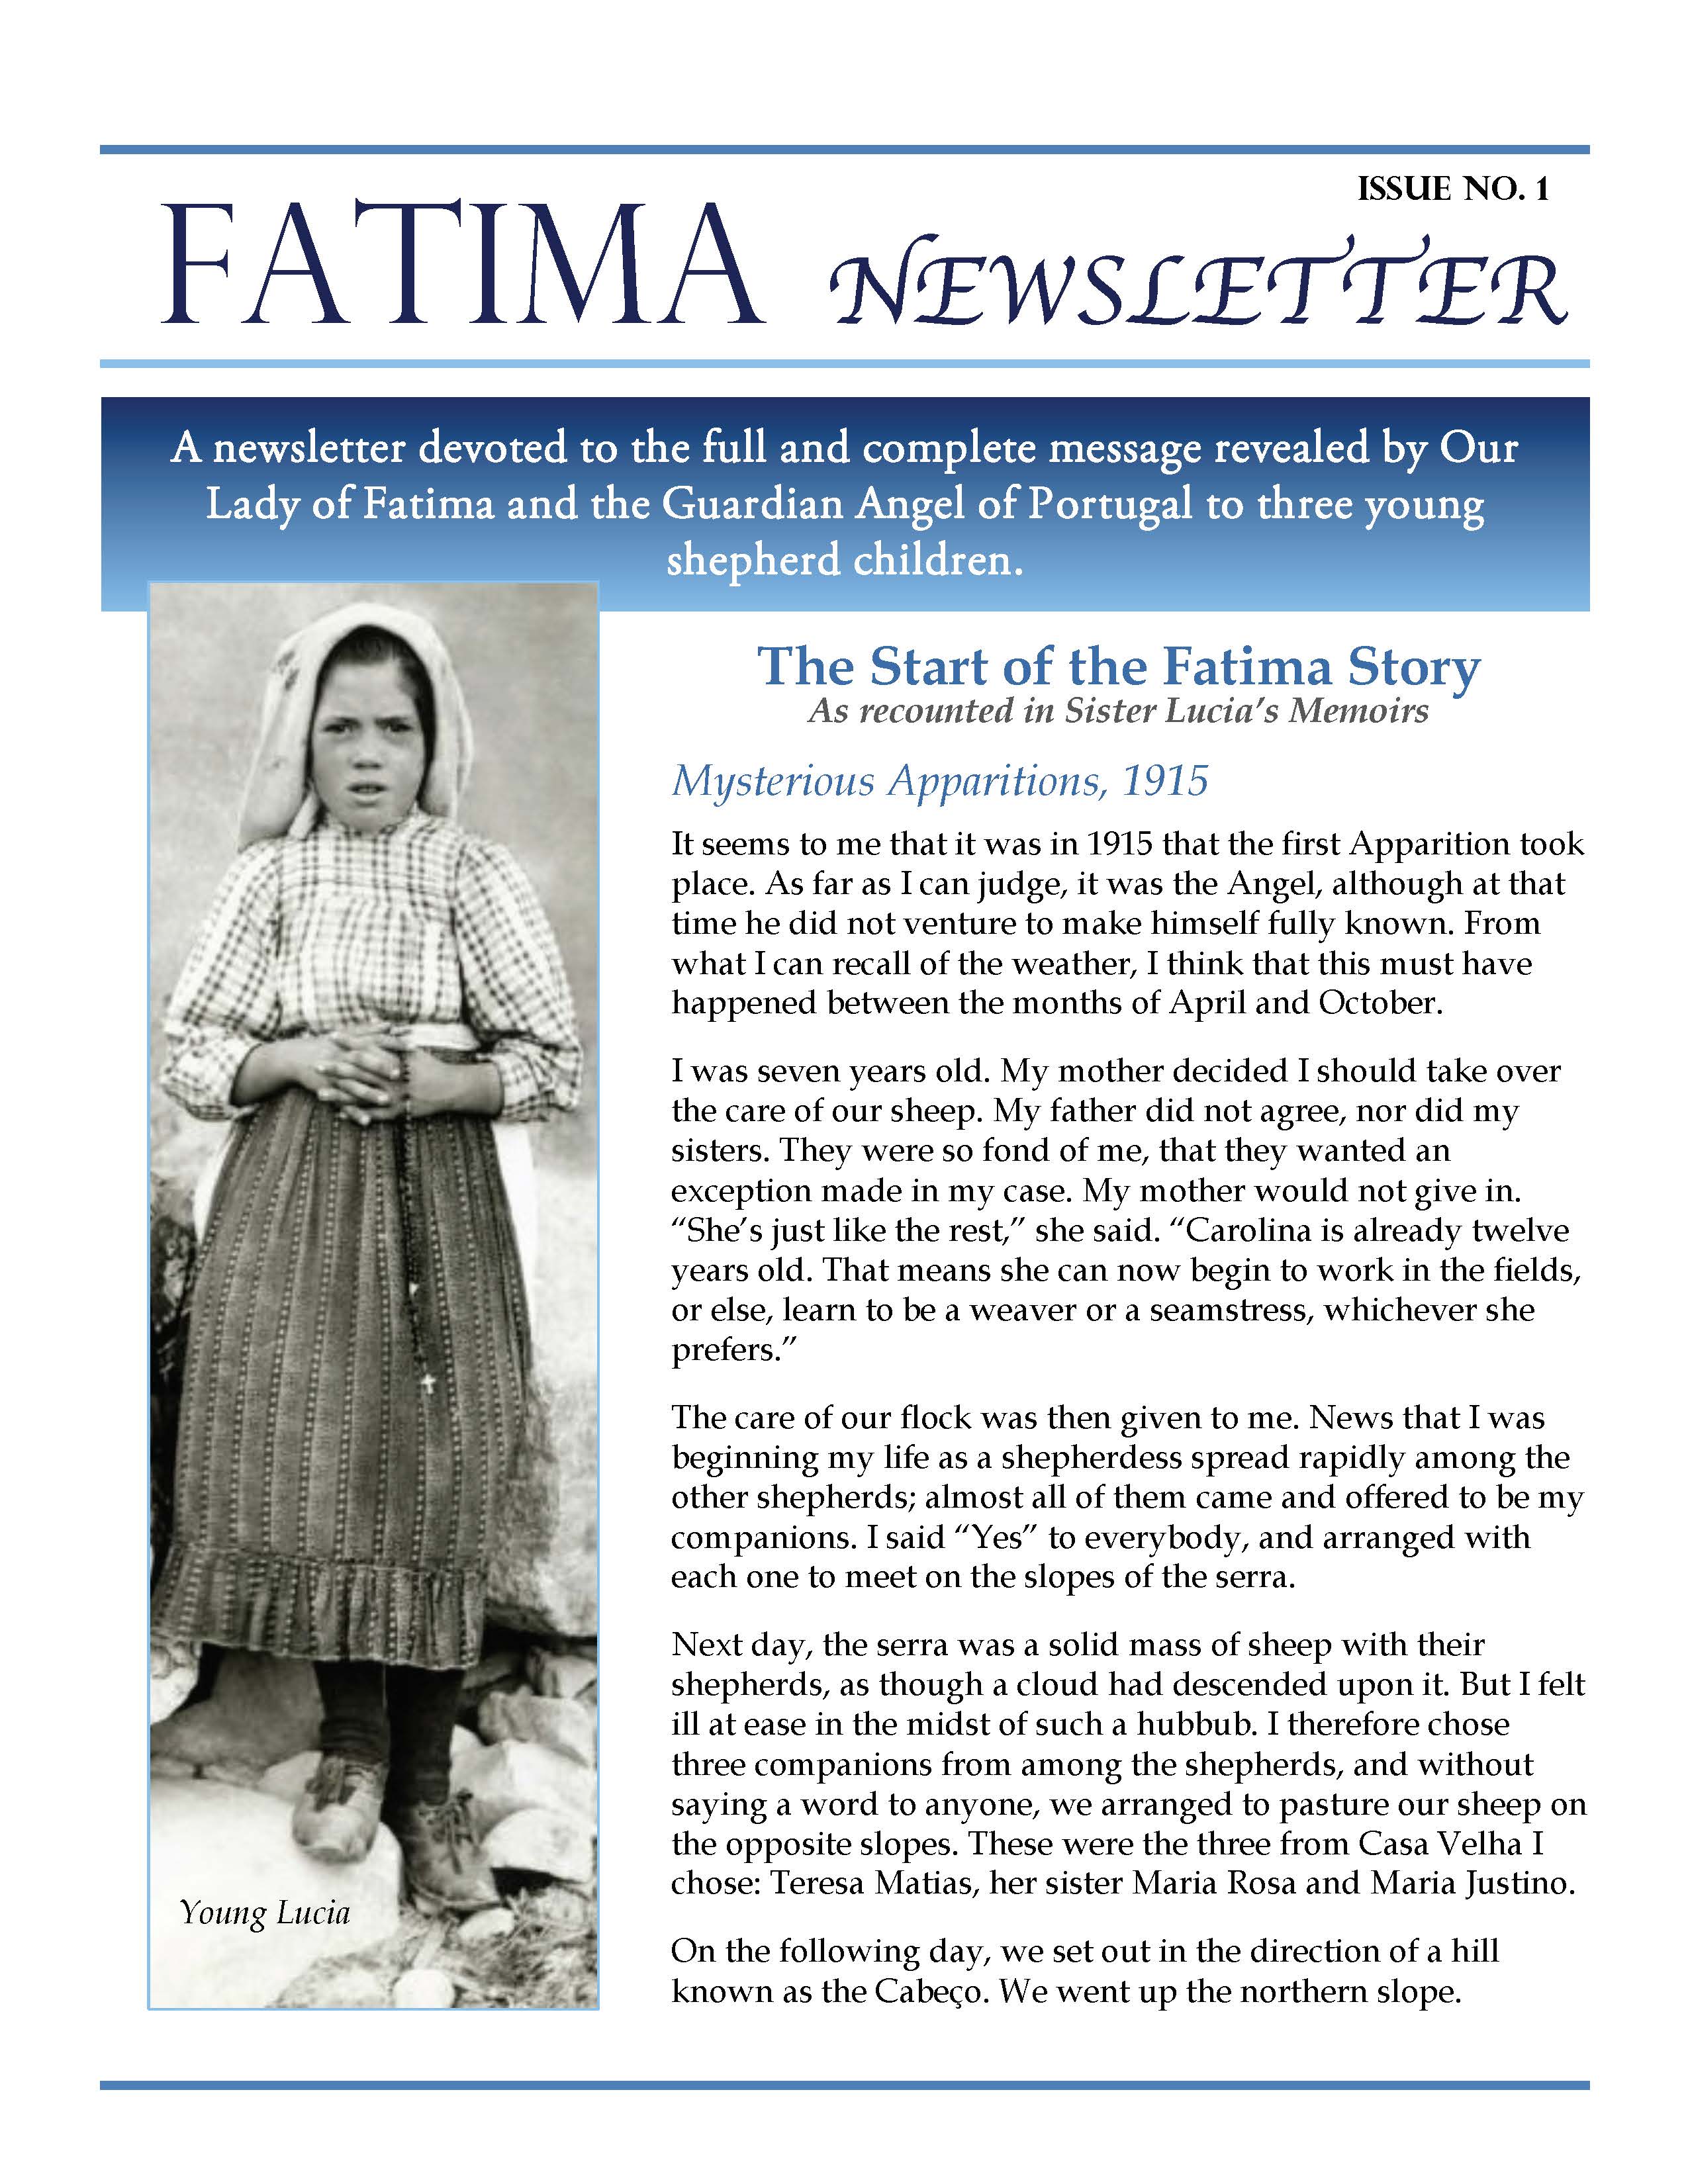 Fatima Newsletter_Issue 1_January 2019_Page_1